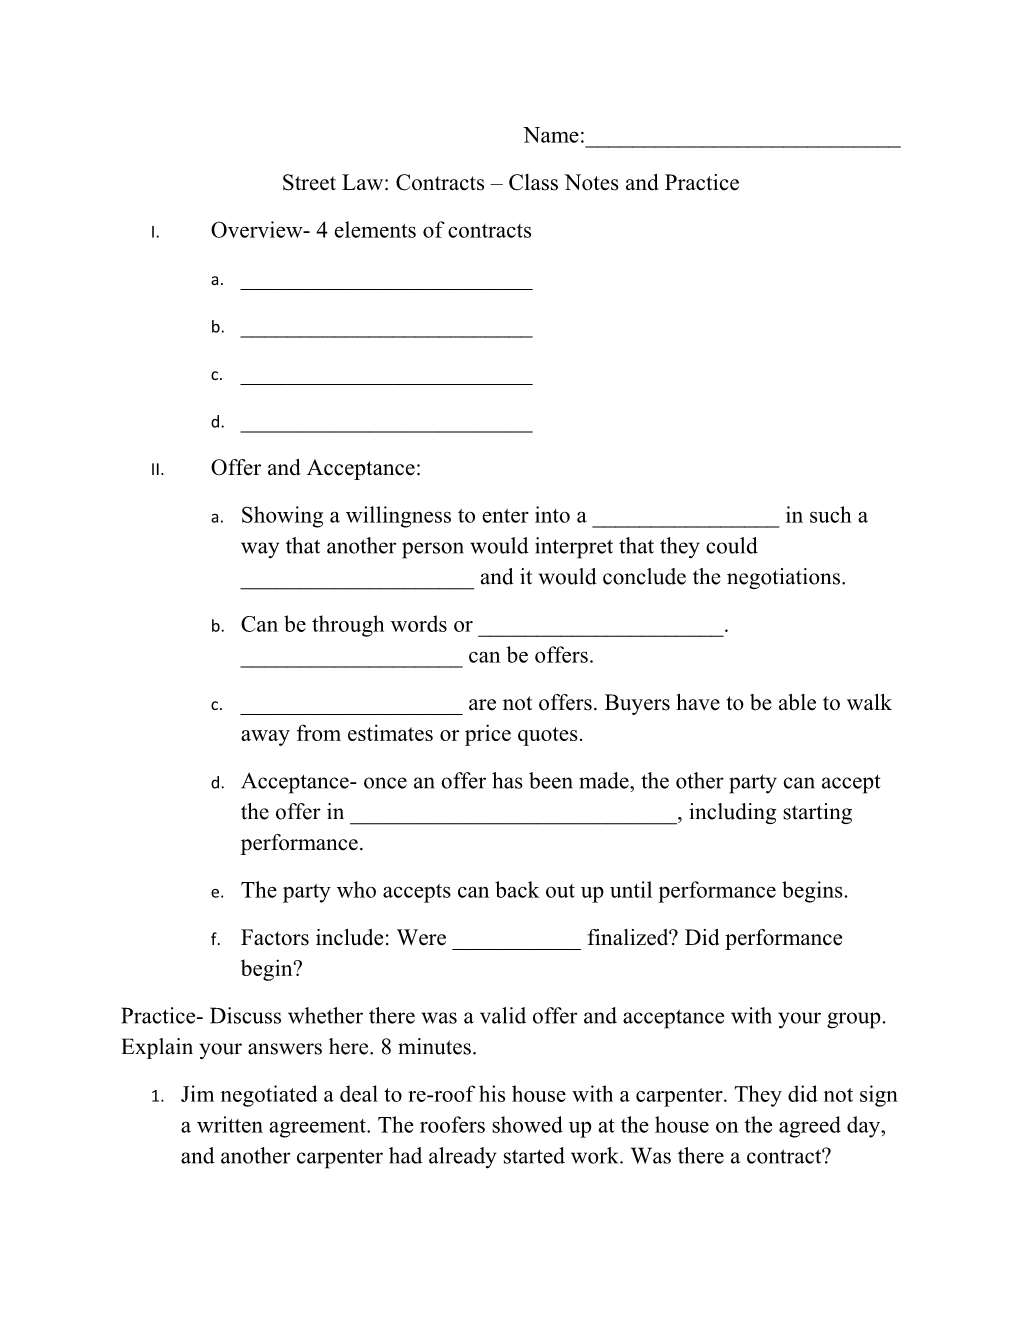 Street Law: Contracts Class Notes and Practice